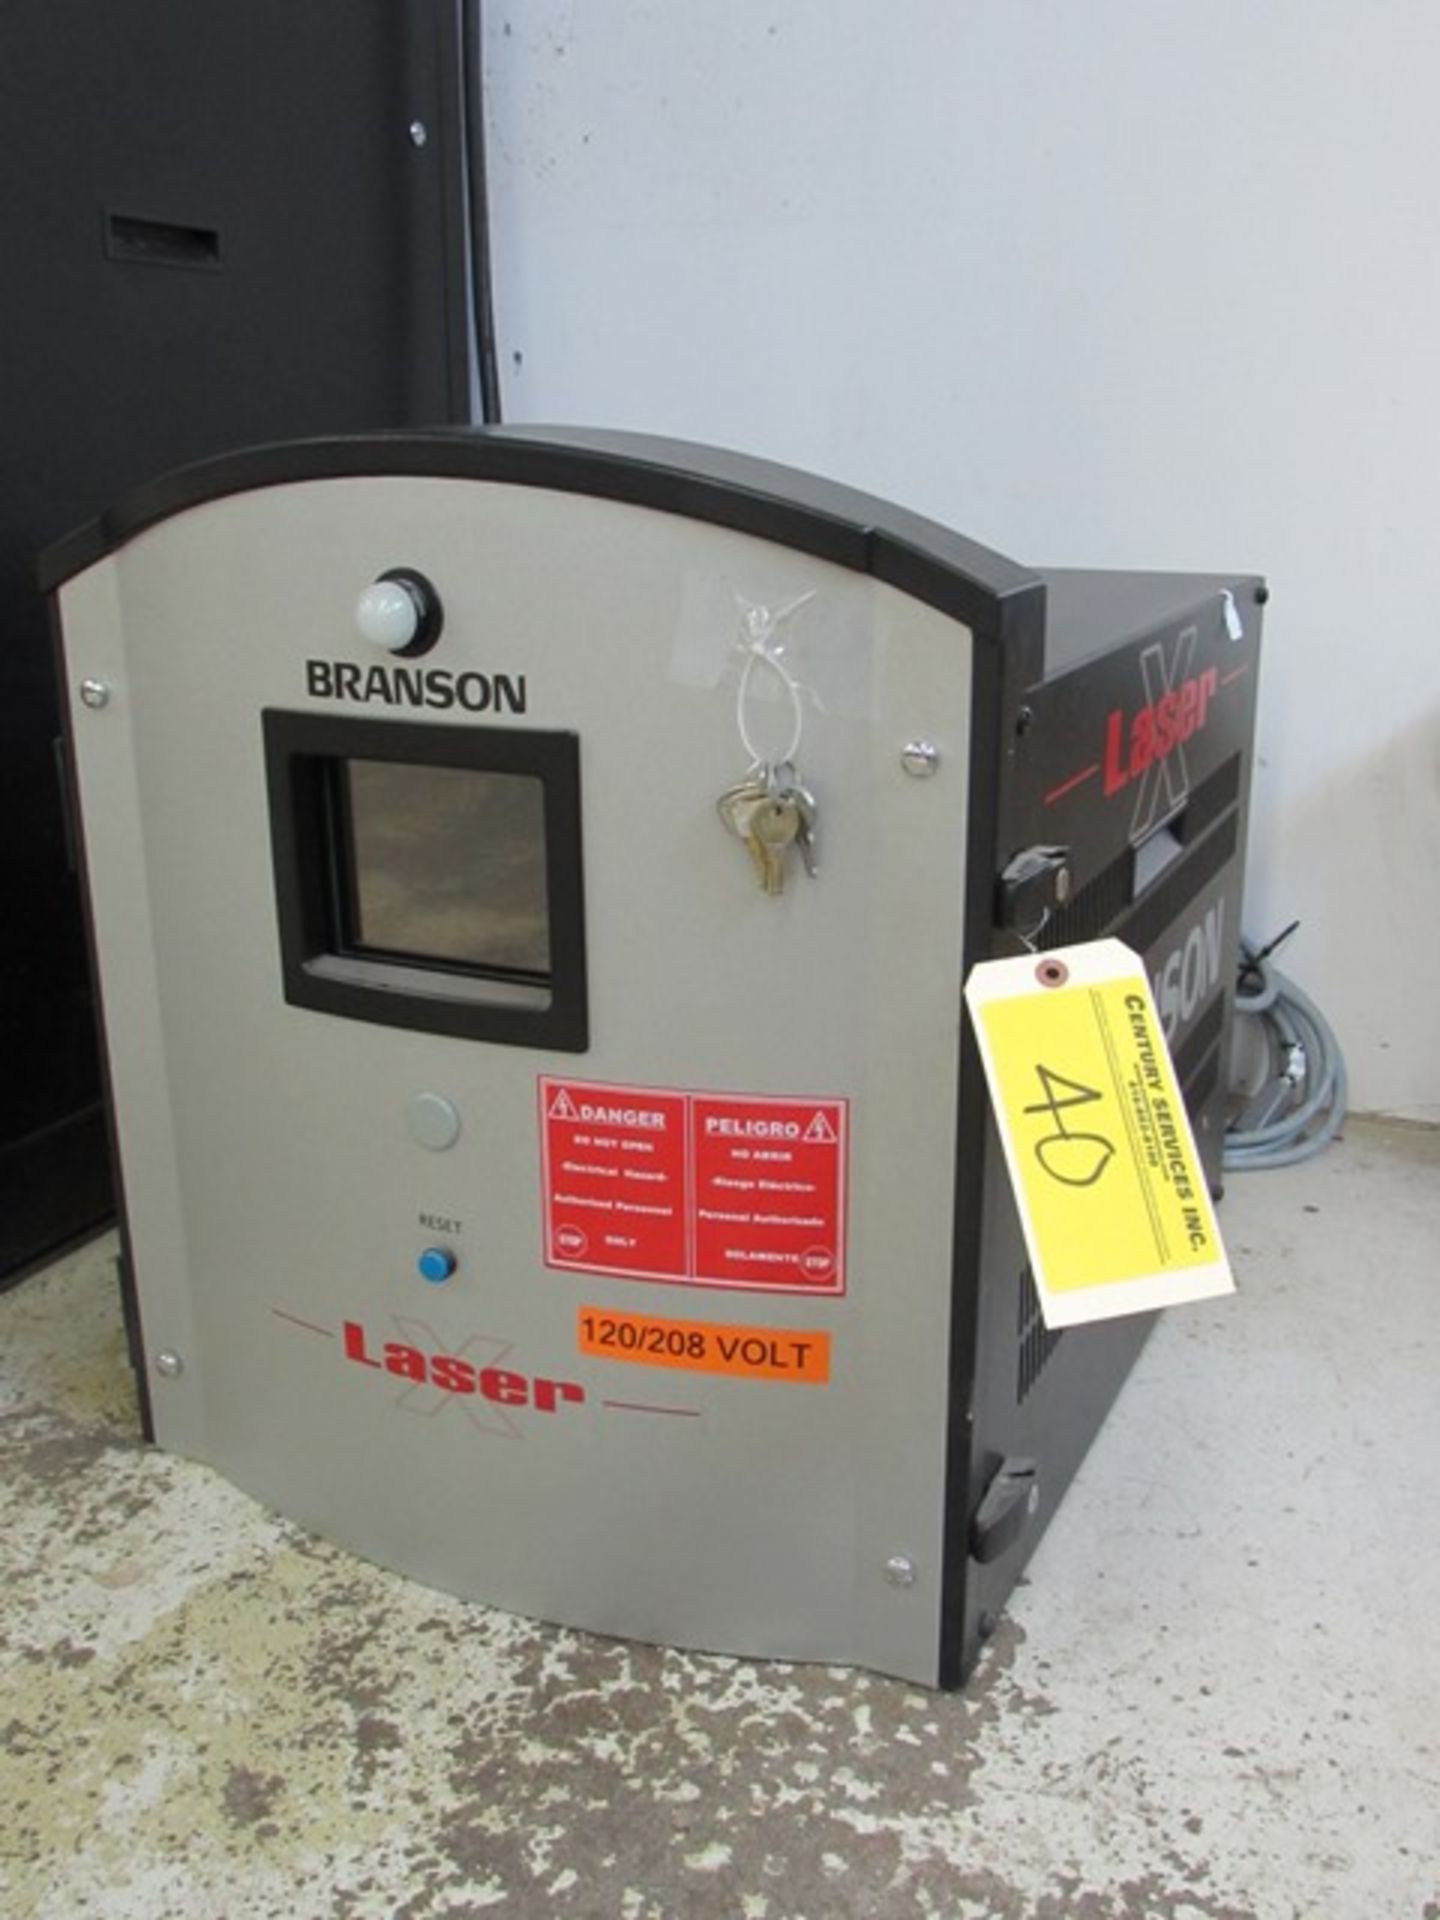 2011 Branson laser welding system equipment c/w  Radiance 3G bench-top controller with 2-laser - Image 2 of 13